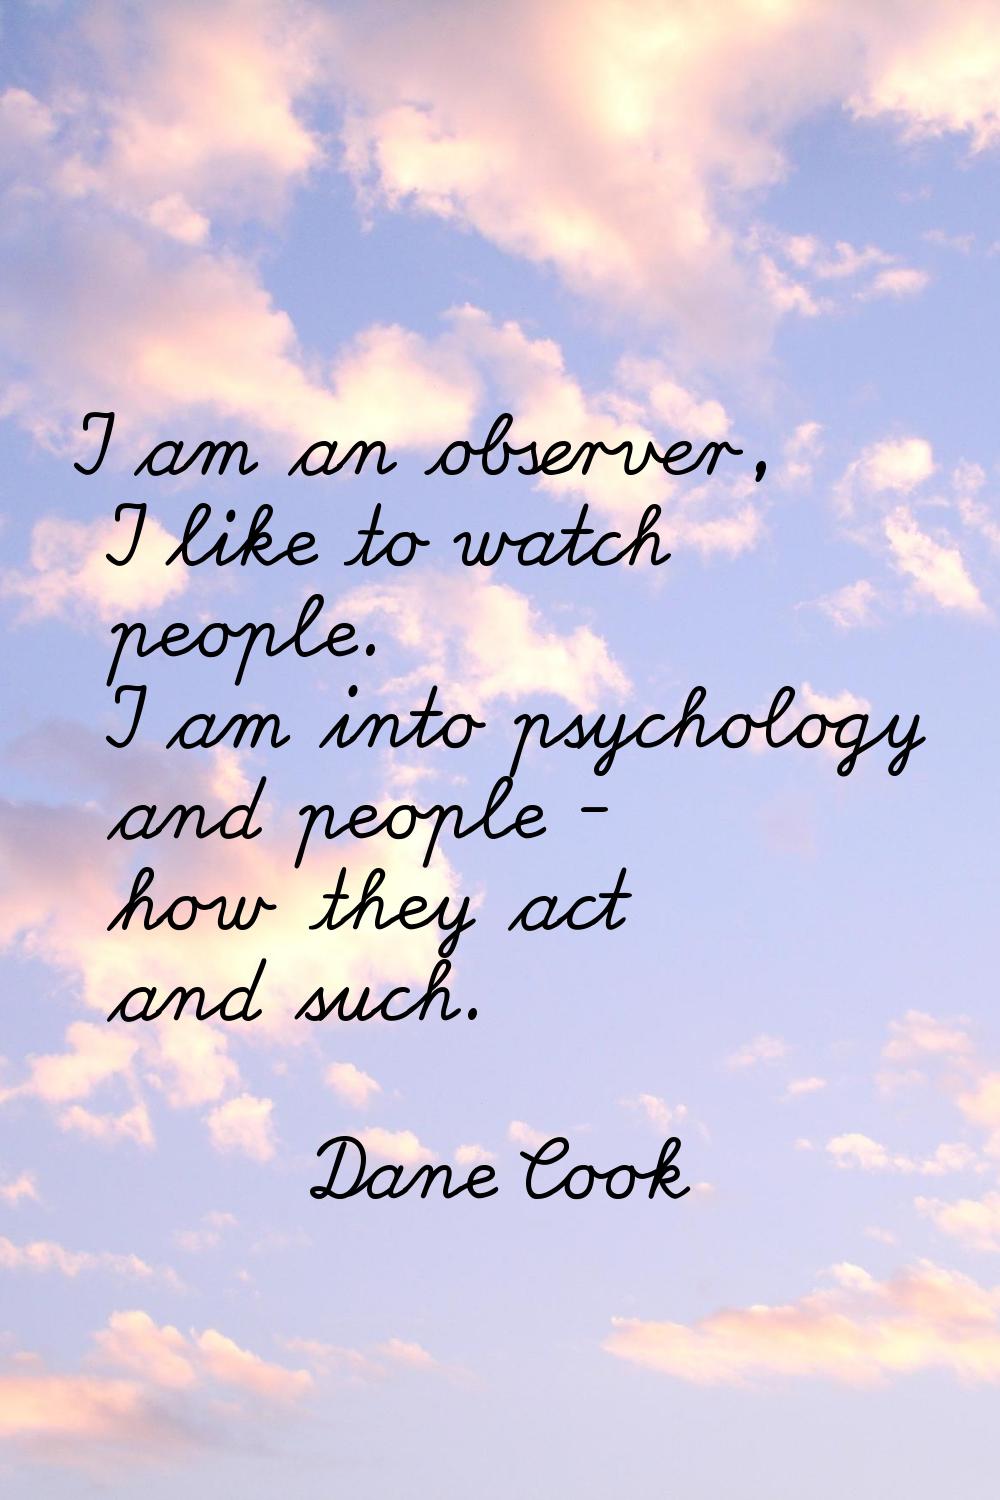 I am an observer, I like to watch people. I am into psychology and people - how they act and such.